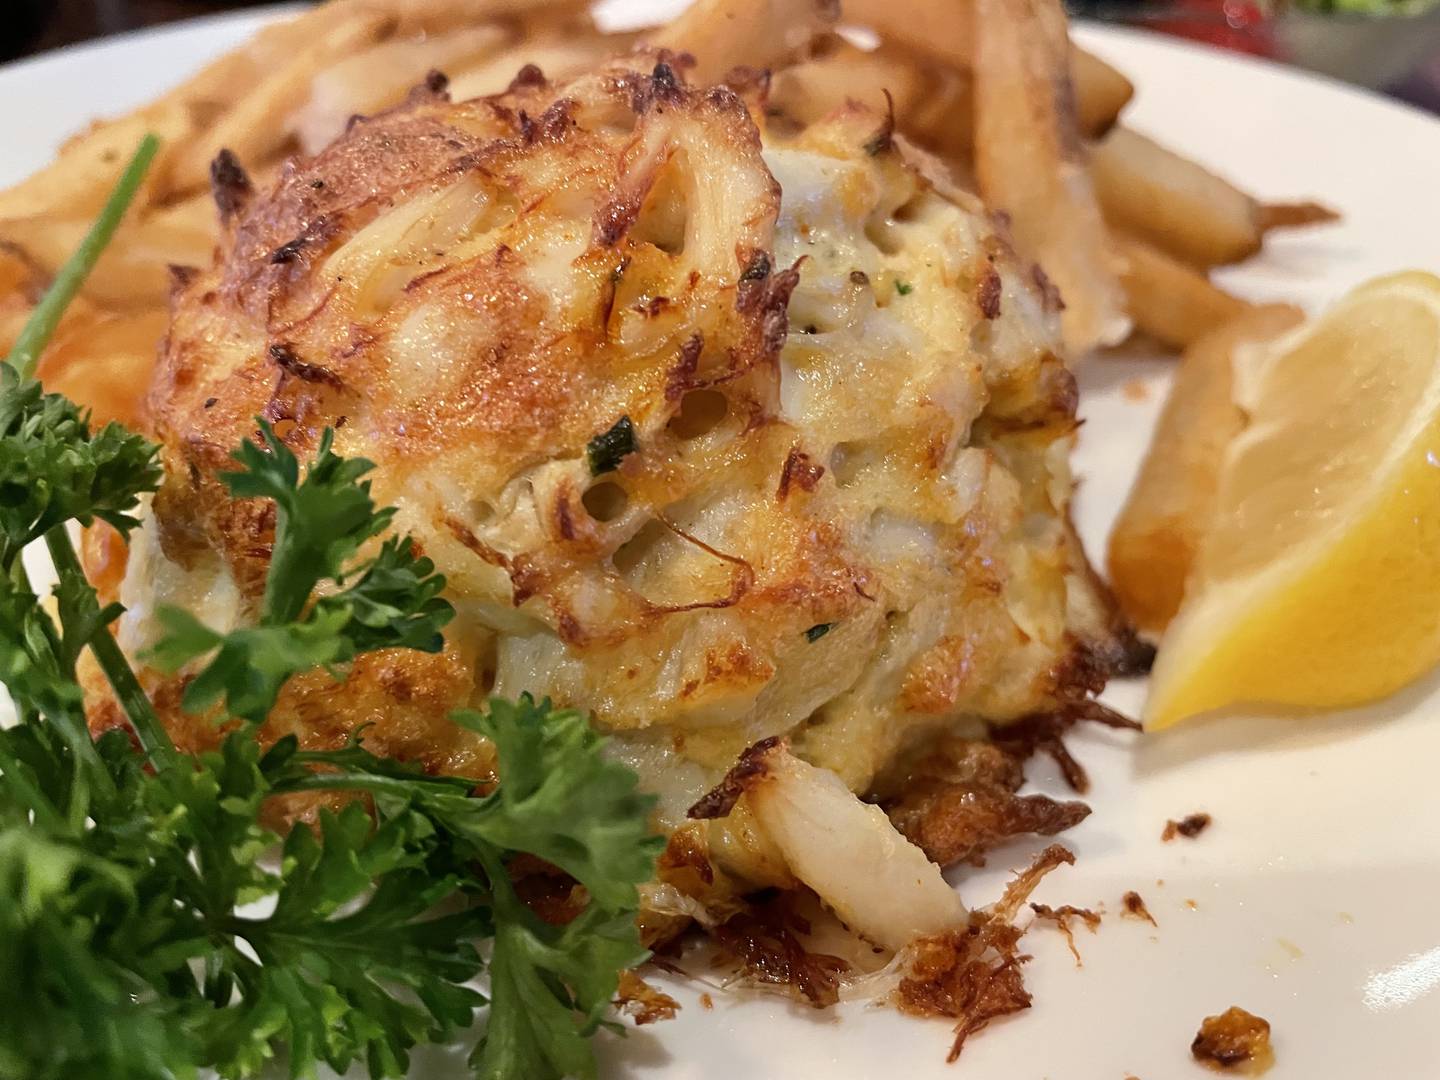 The crab cake made by Pappas Seafood Company is a favorite of media mogul Oprah Winfrey.